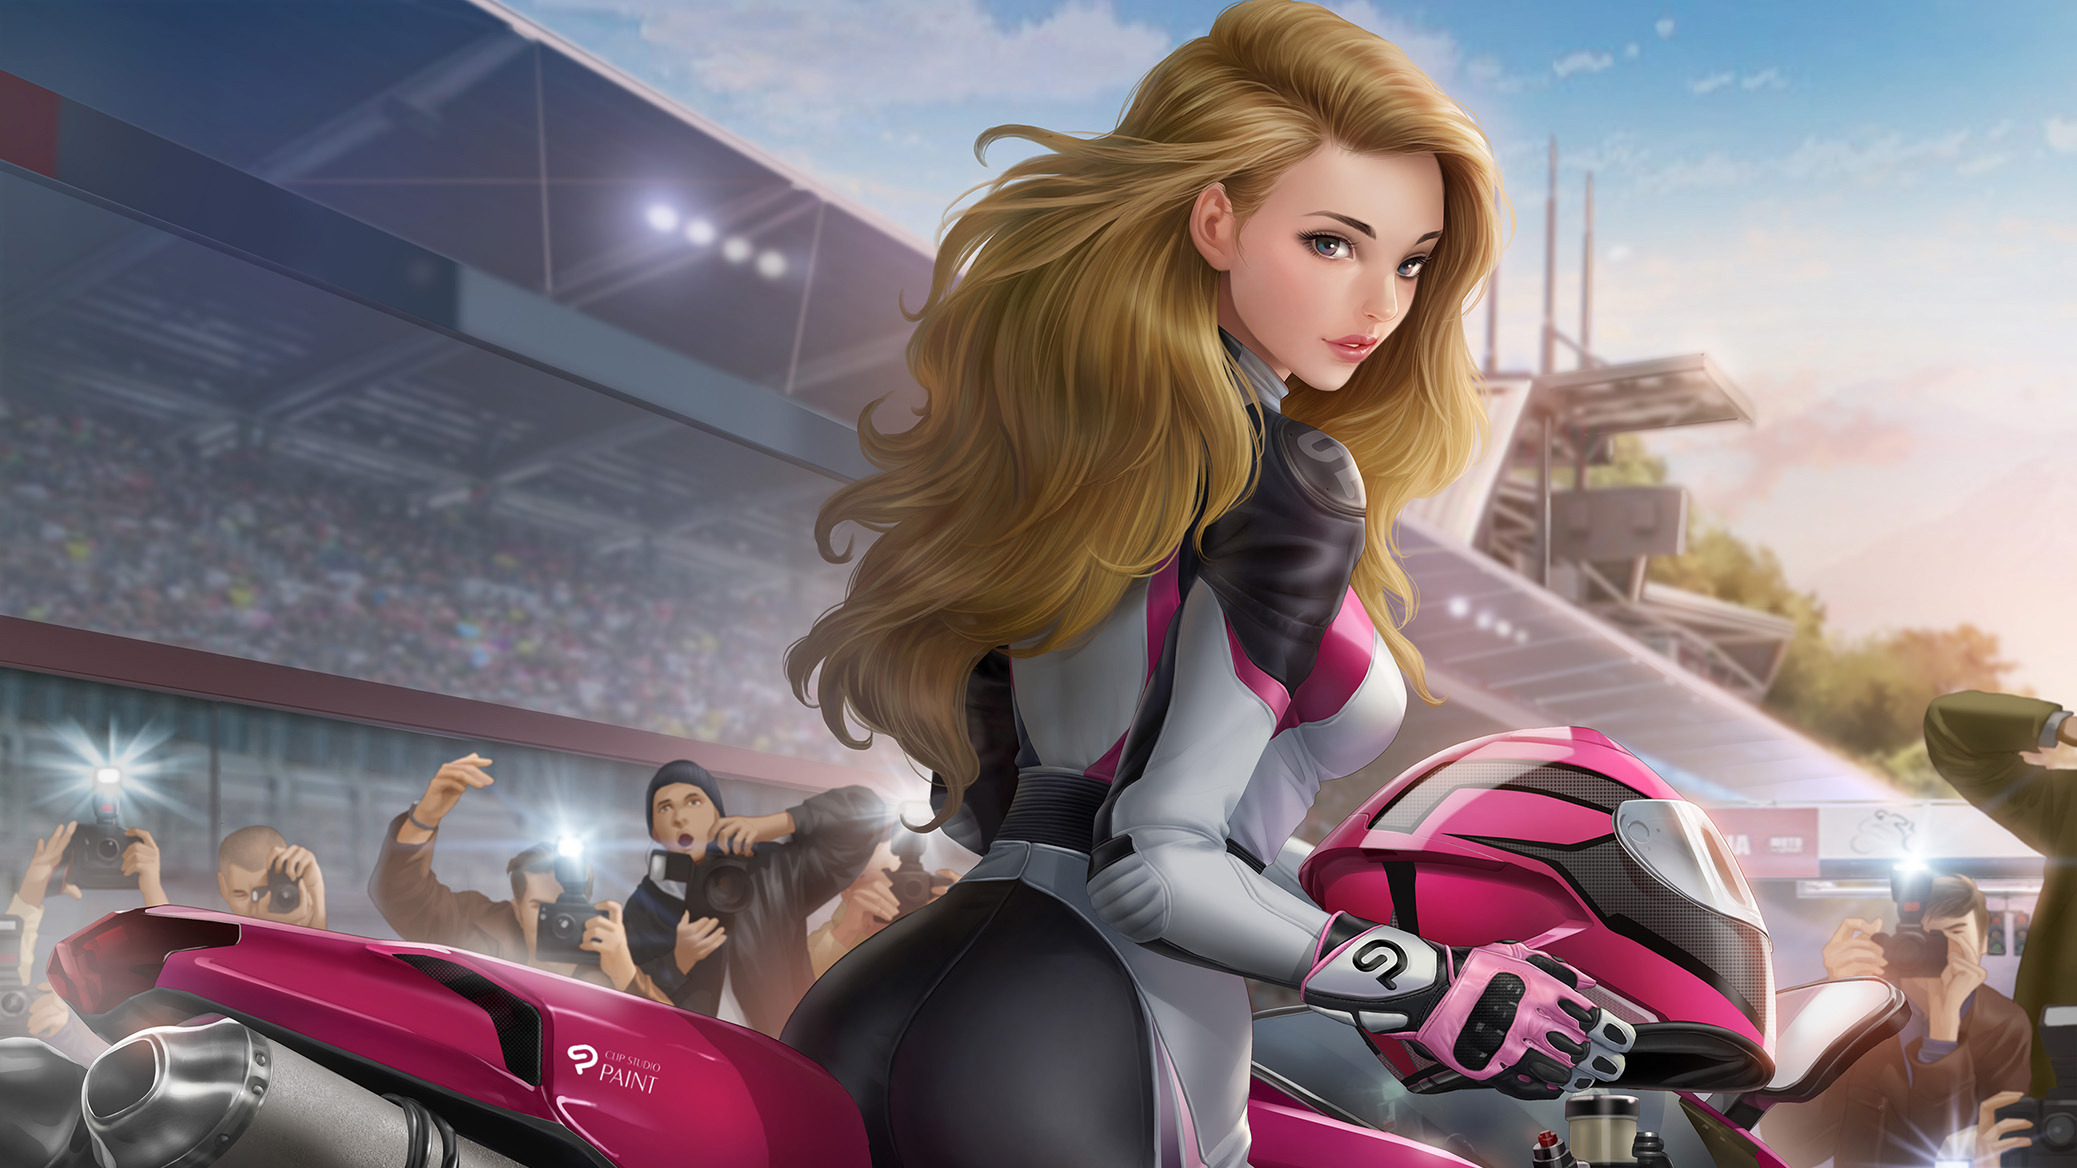 2077x1168 2560x1440 Girl On Racing Bike 1440P Resolution HD 4k Wallpapers, Images, Backgrounds, Photos and Pictures